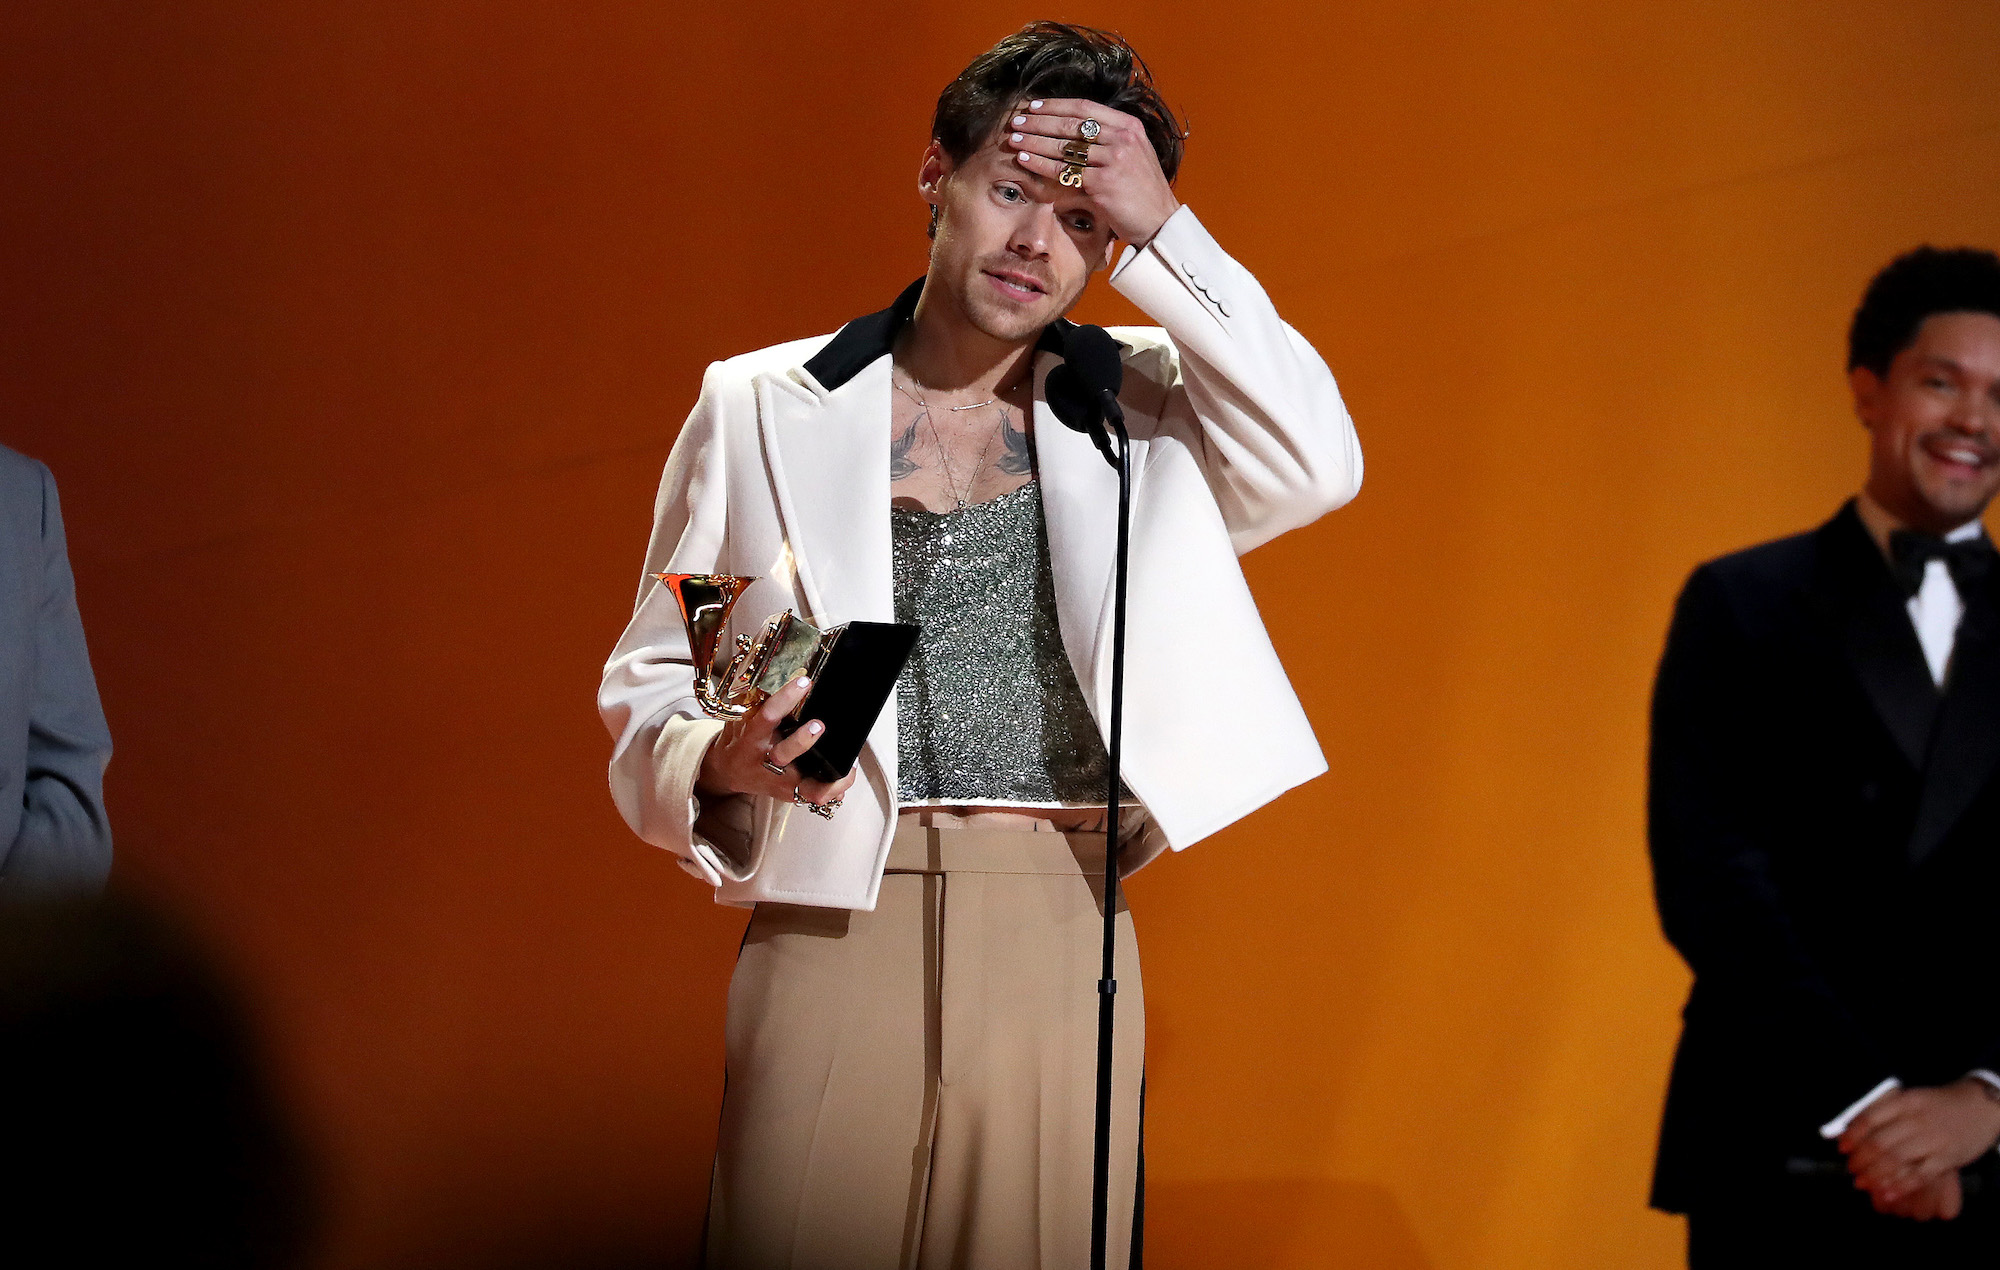 LOS ANGELES, CALIFORNIA - FEBRUARY 05: Harry Styles accepts the Album Of The Year award for “Harry's House” onstage during the 65th GRAMMY Awards at Crypto.com Arena on February 05, 2023 in Los Angeles, California. (Photo by Johnny Nunez/The Recording Academy)